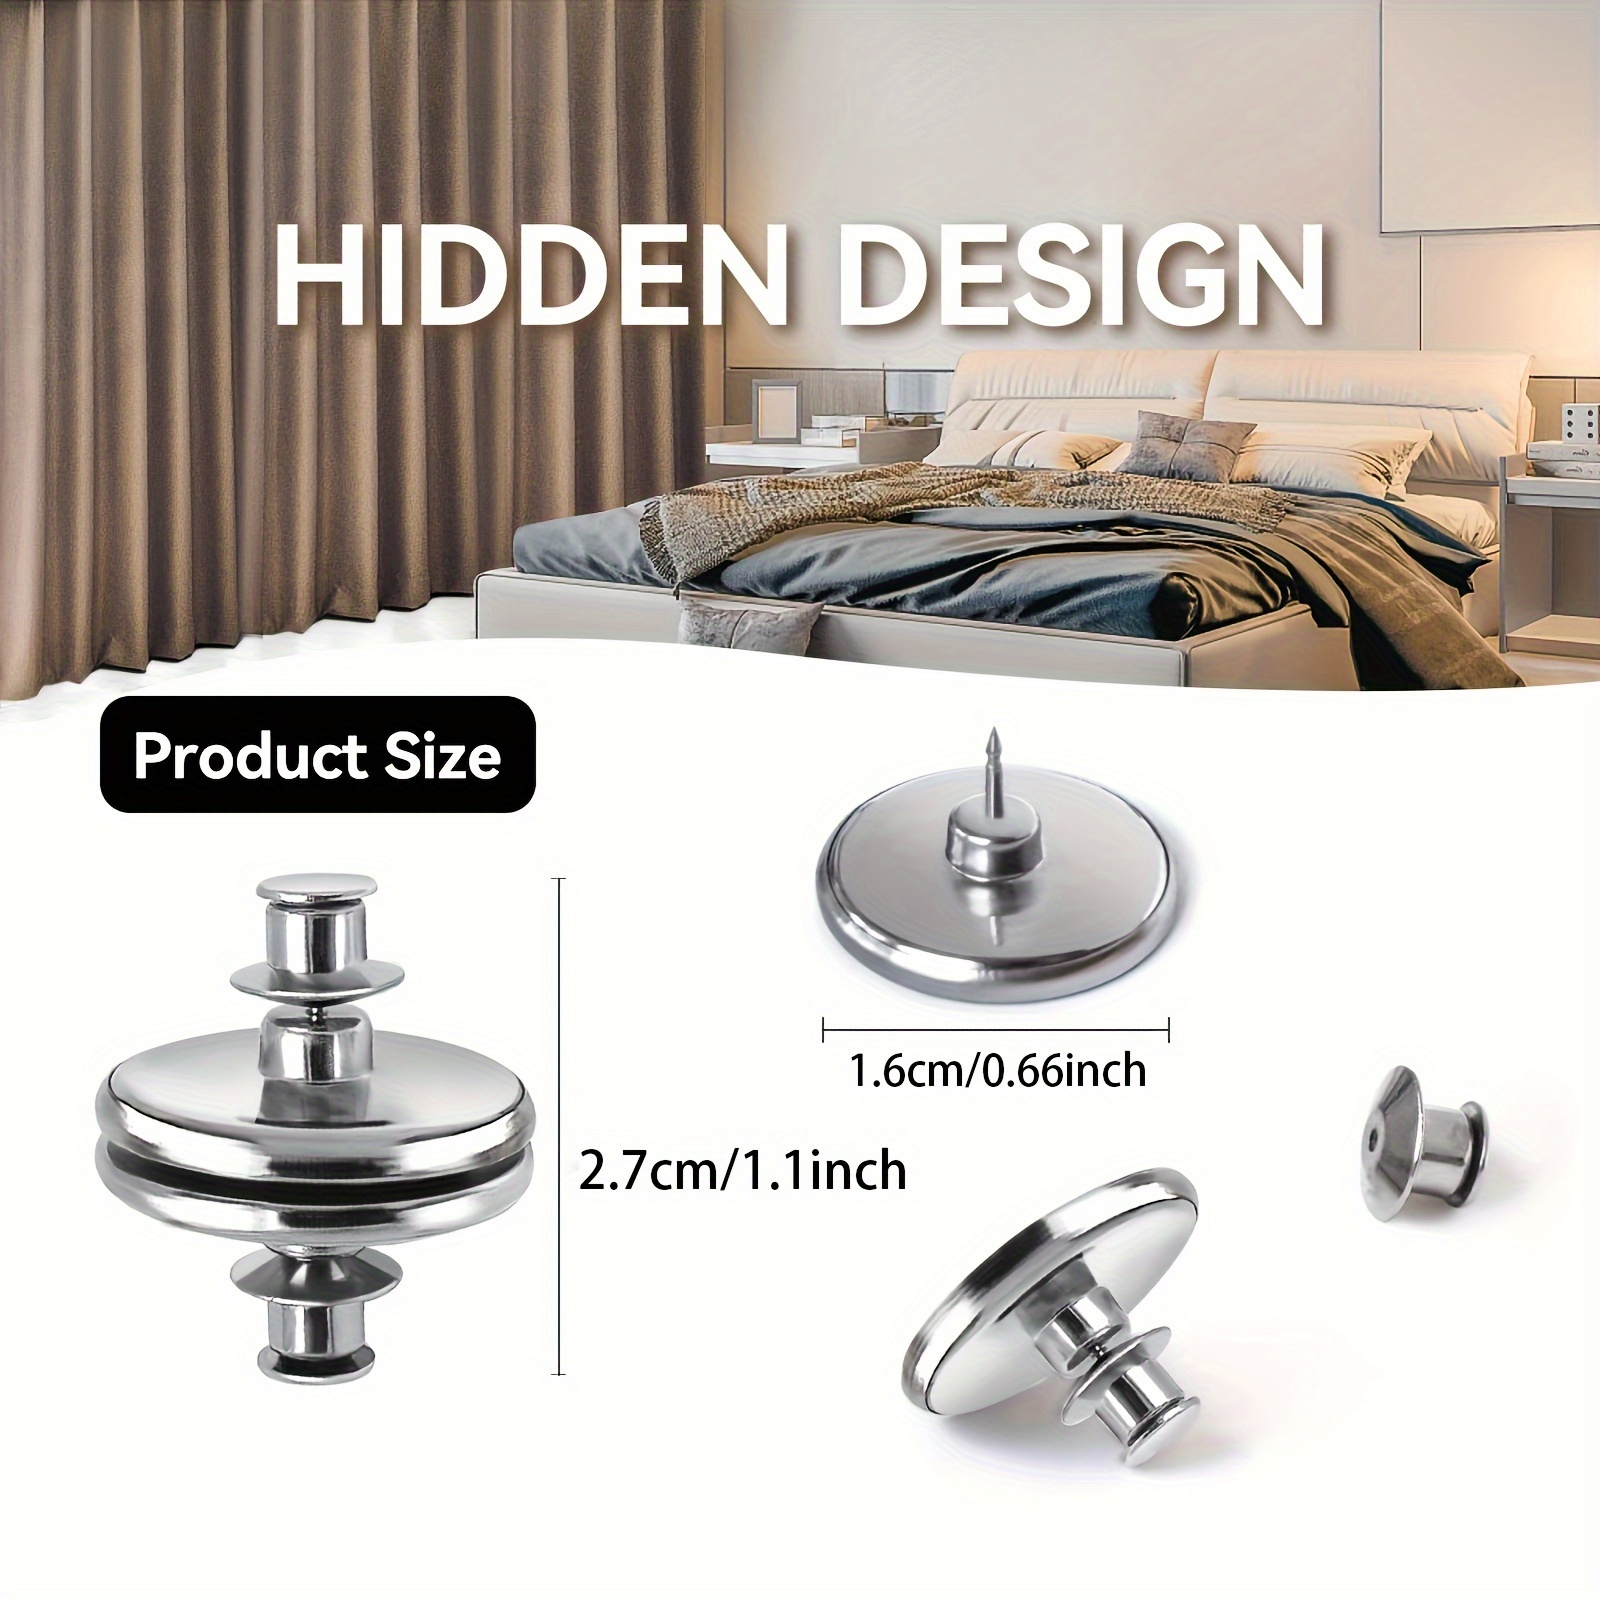 8 Pcs Curtain Magnets Closure for Drapes, Round Magnetic Curtain Clips  Metal Holdback Button to Prevent Lights from Leaking, Detachable Drapery  Weights Magnet with Back Tack for Home Bedroom Draperies 